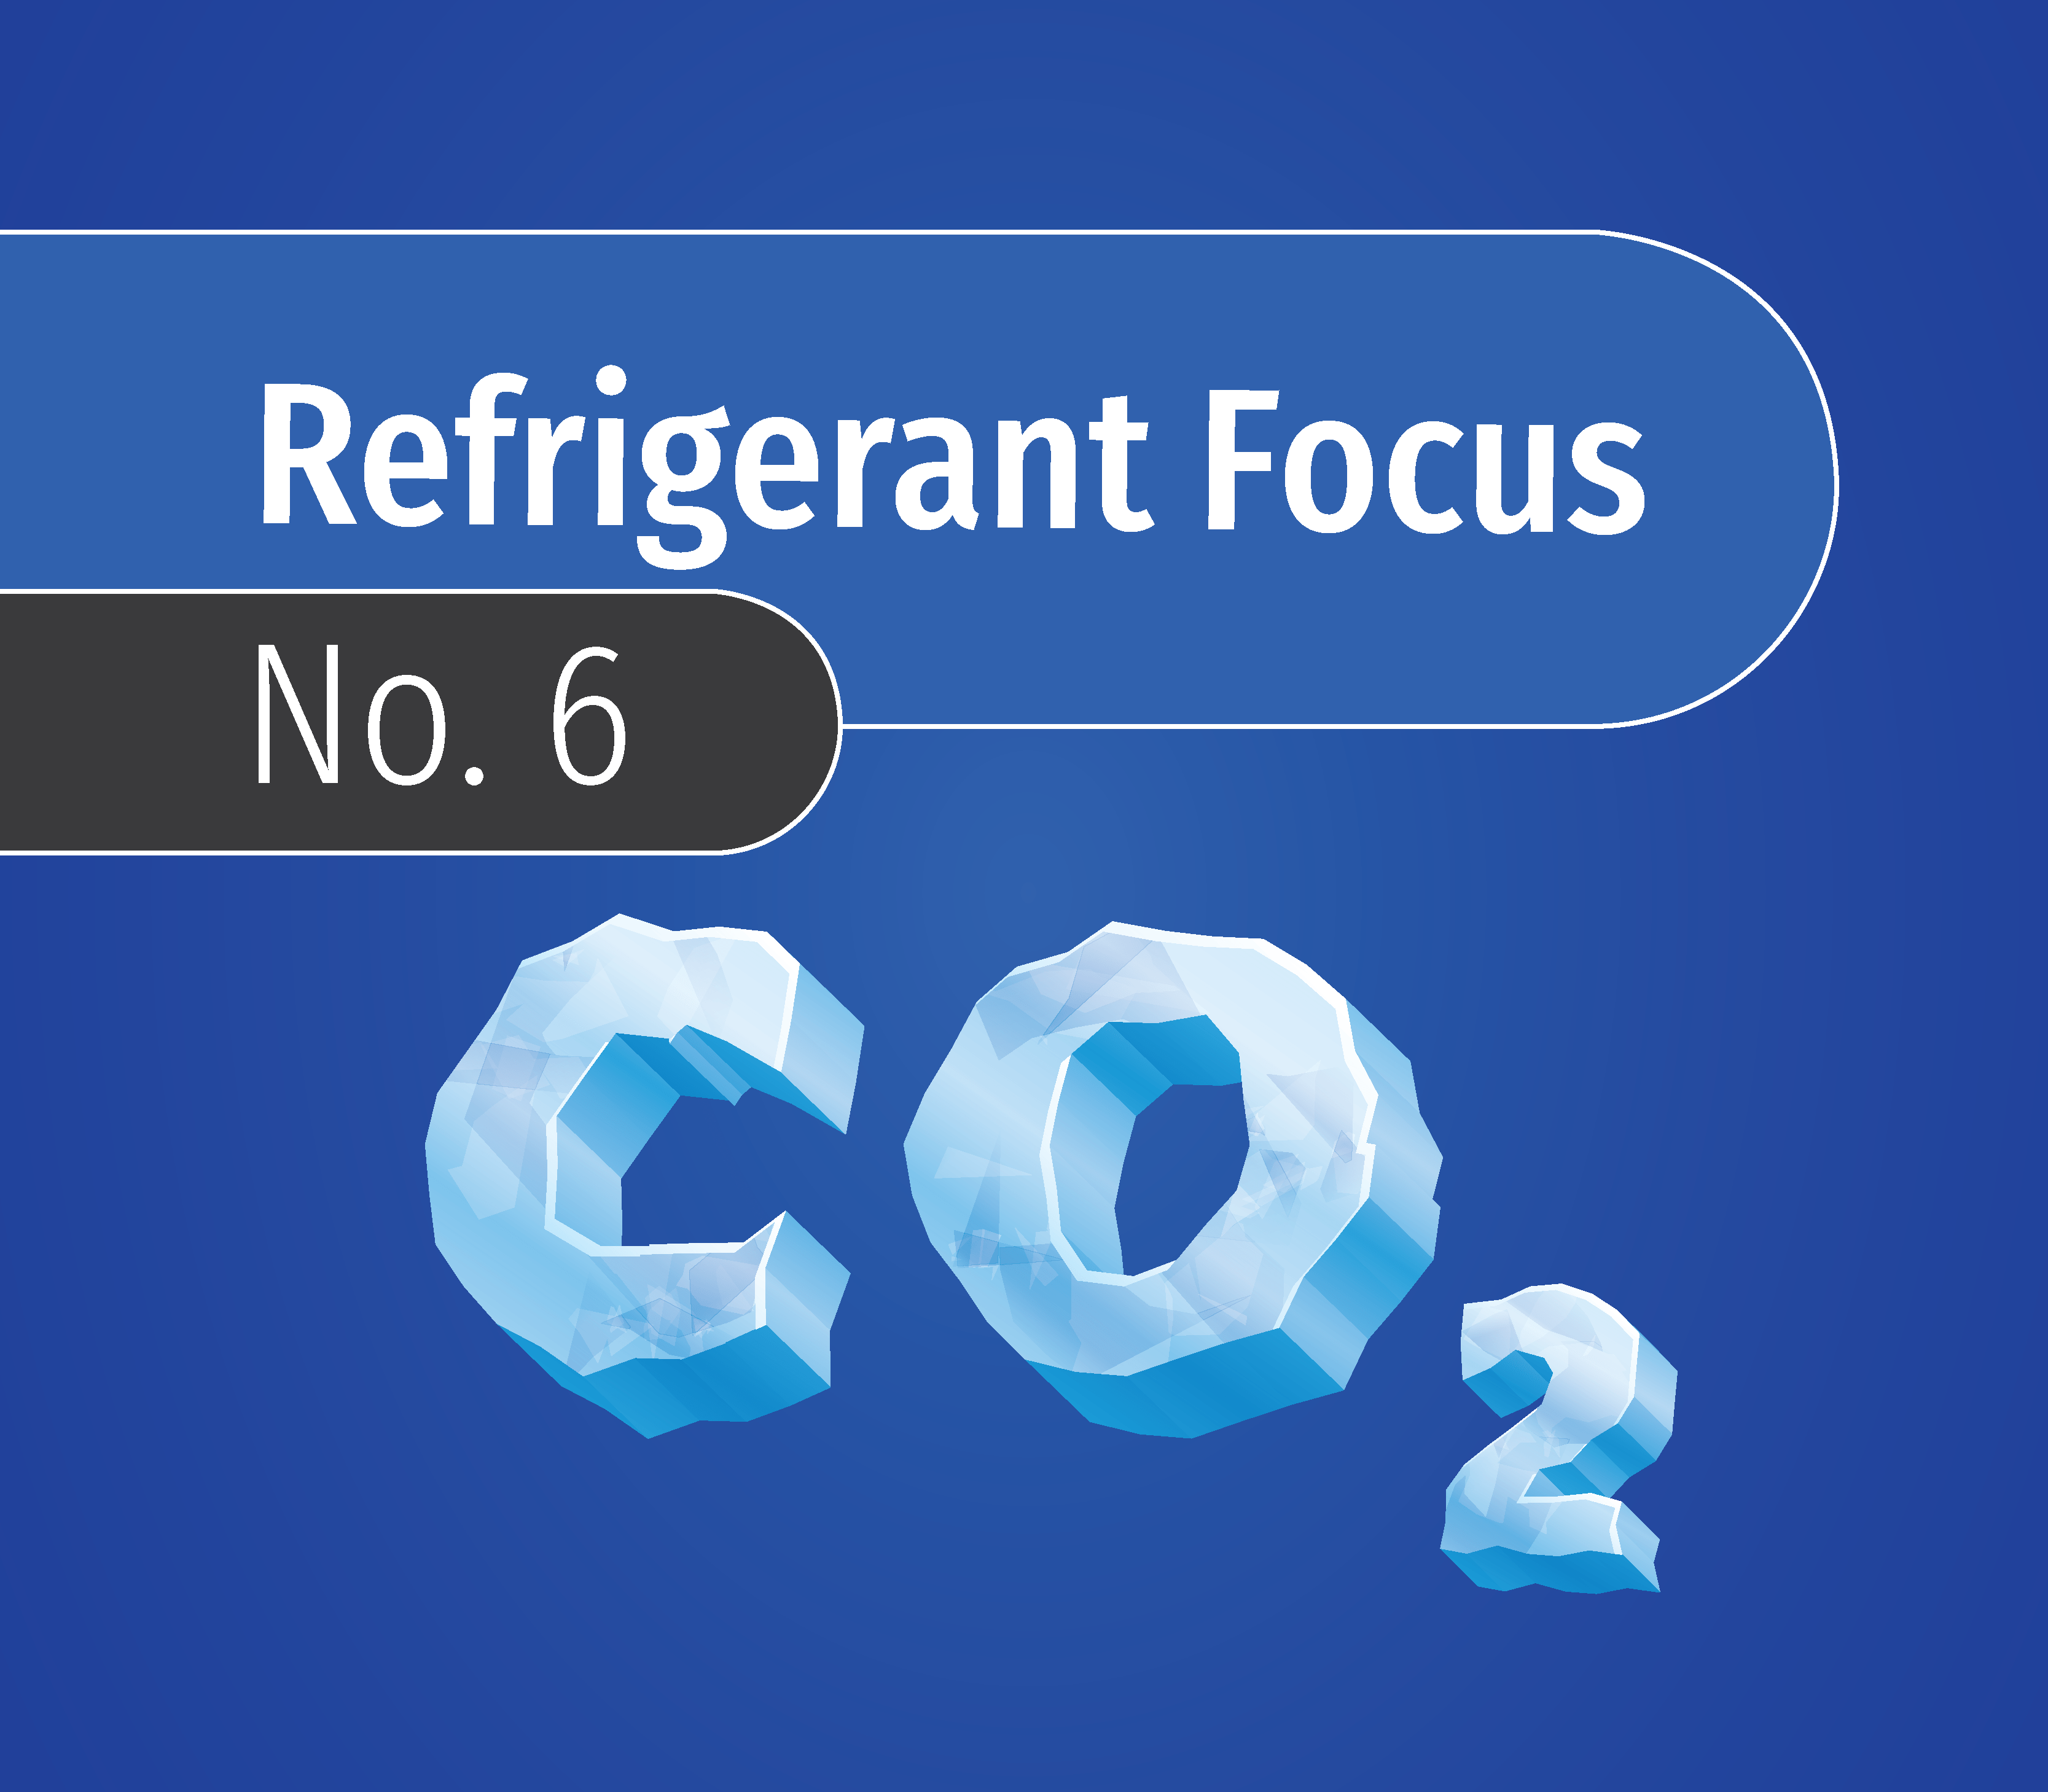 Icy CO2 lettering against a blue background